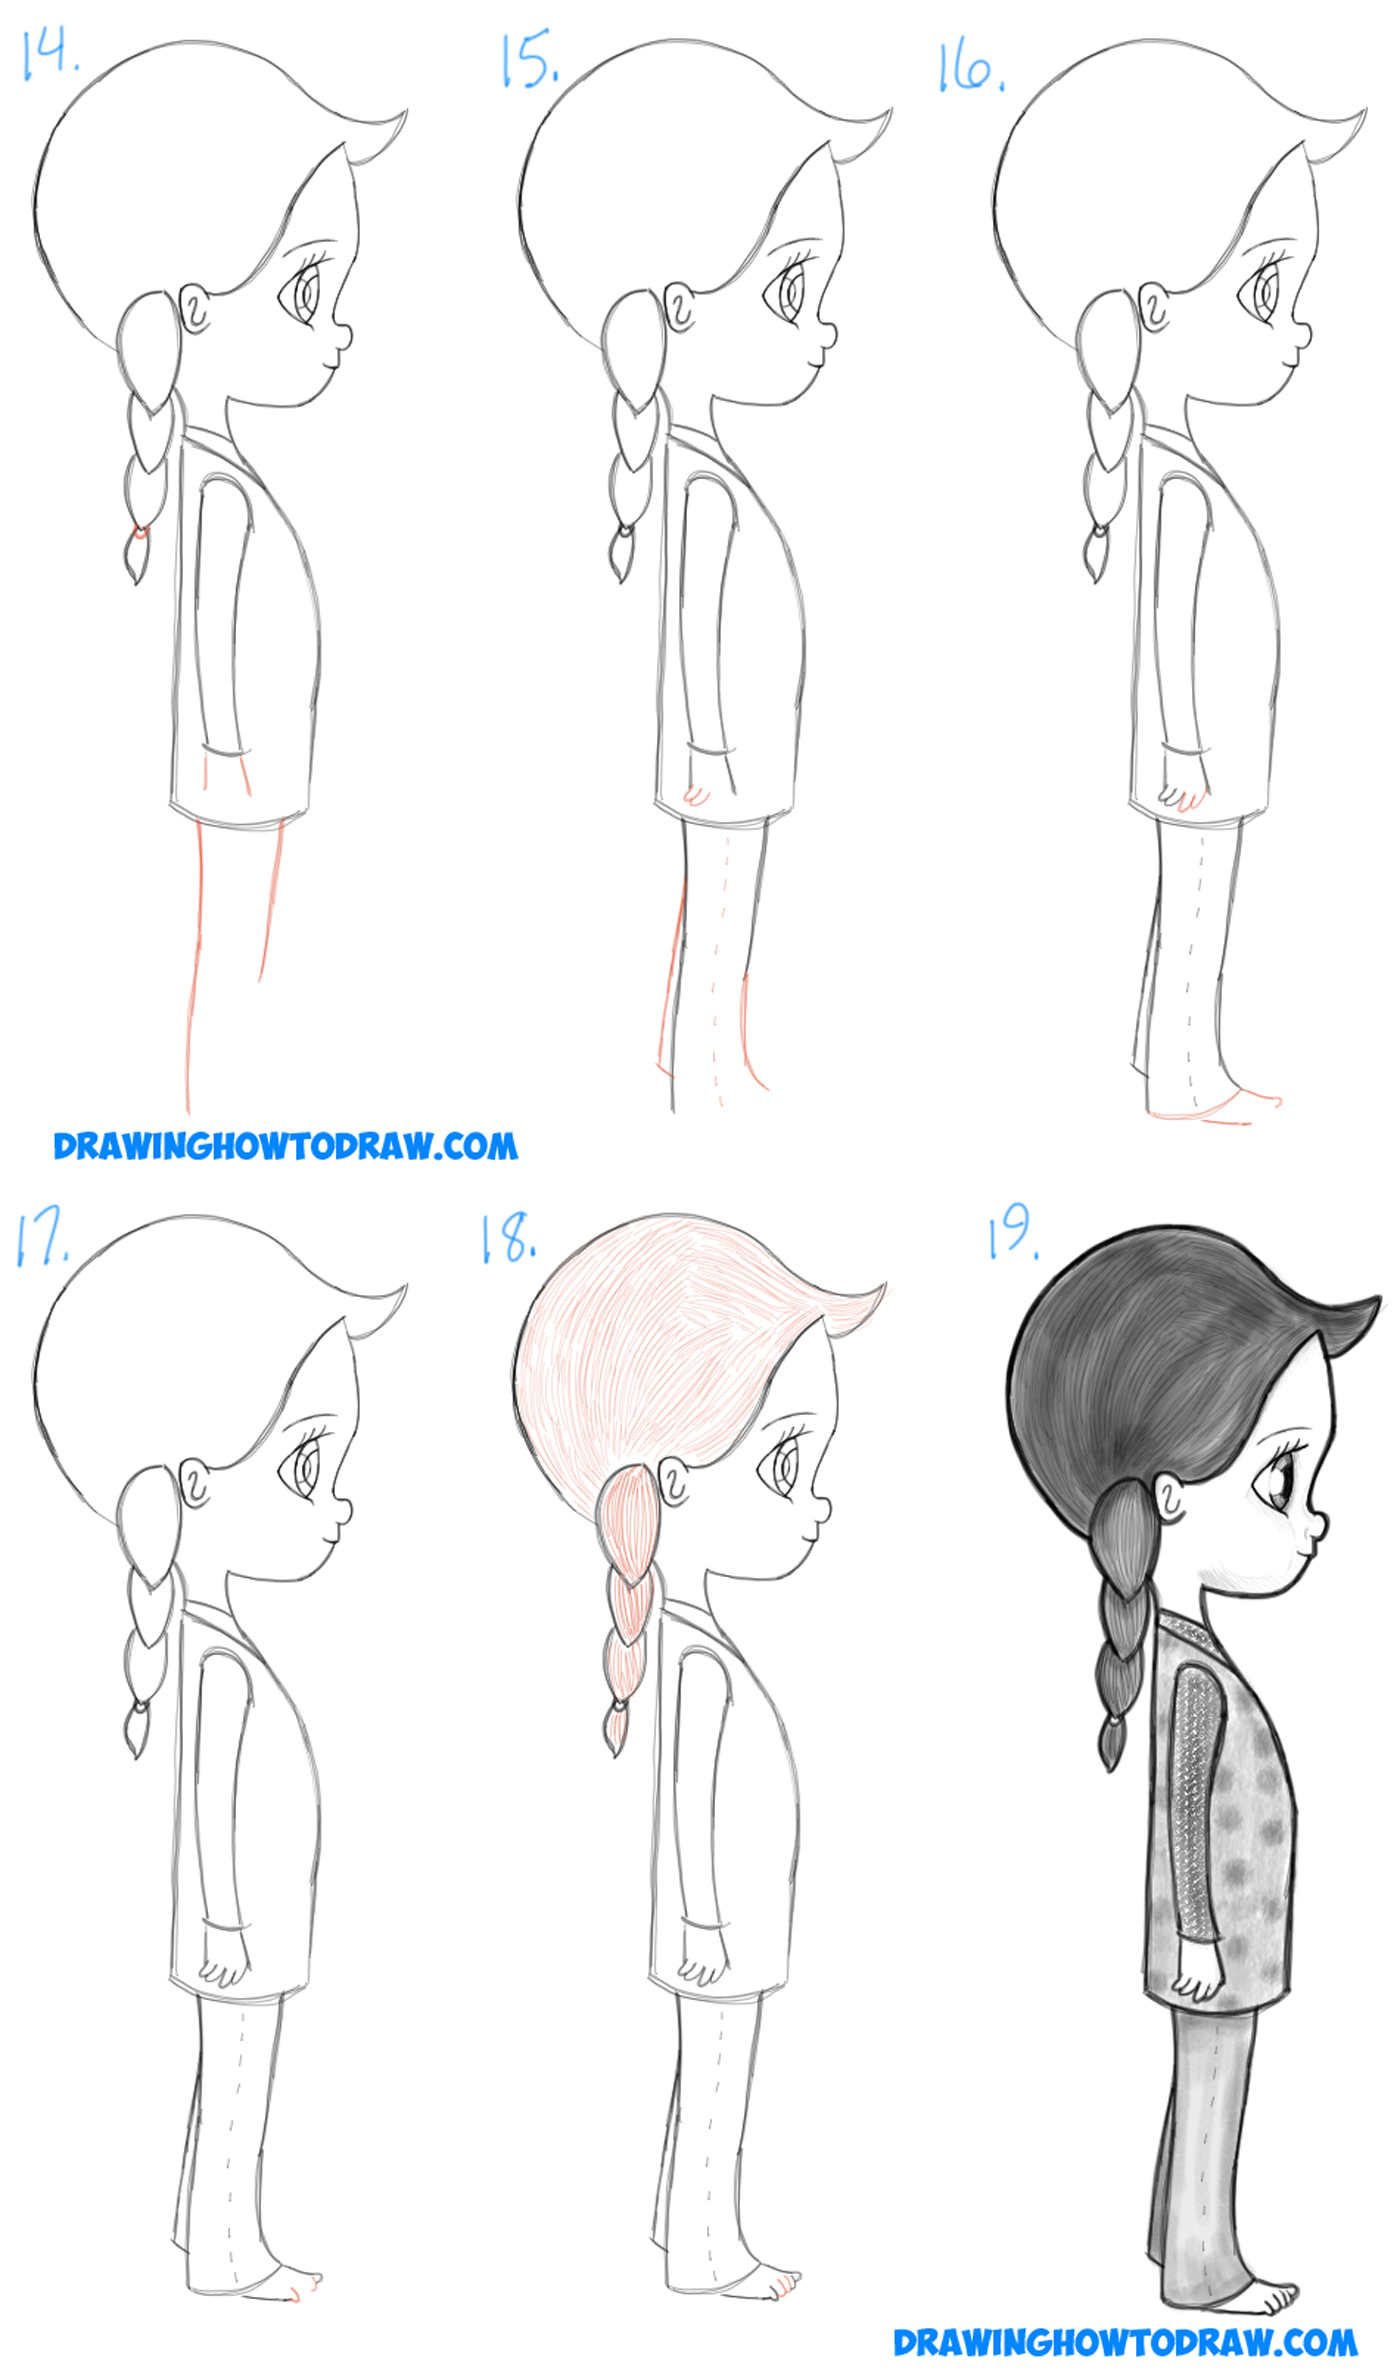 How To Draw A Cute Chibi Manga Anime Girl From The Side View Easy Step By Step Drawing Tutorial For Kids Beginners How To Draw Step By Step Drawing Tutorials